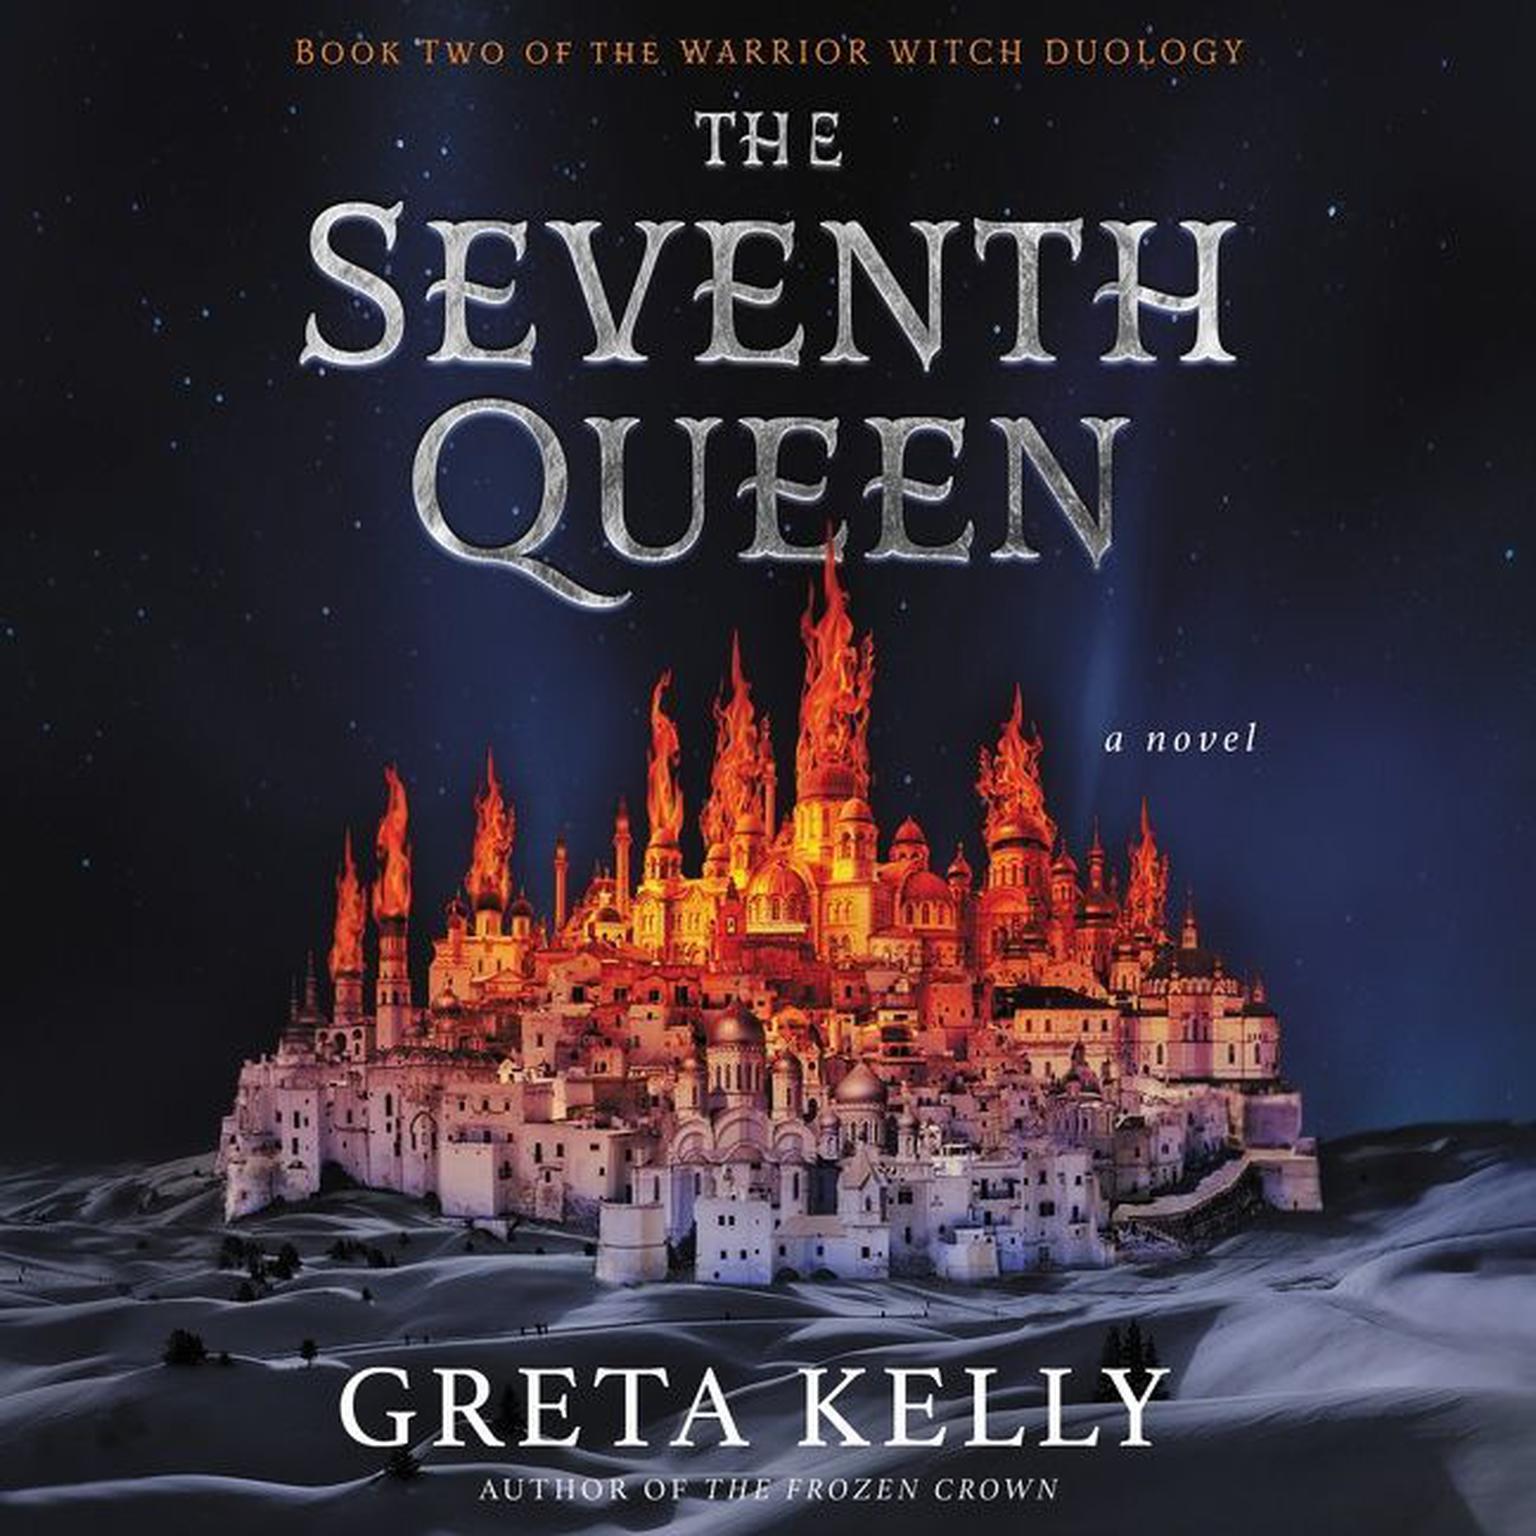 The Seventh Queen: A Novel Audiobook, by Greta Kelly